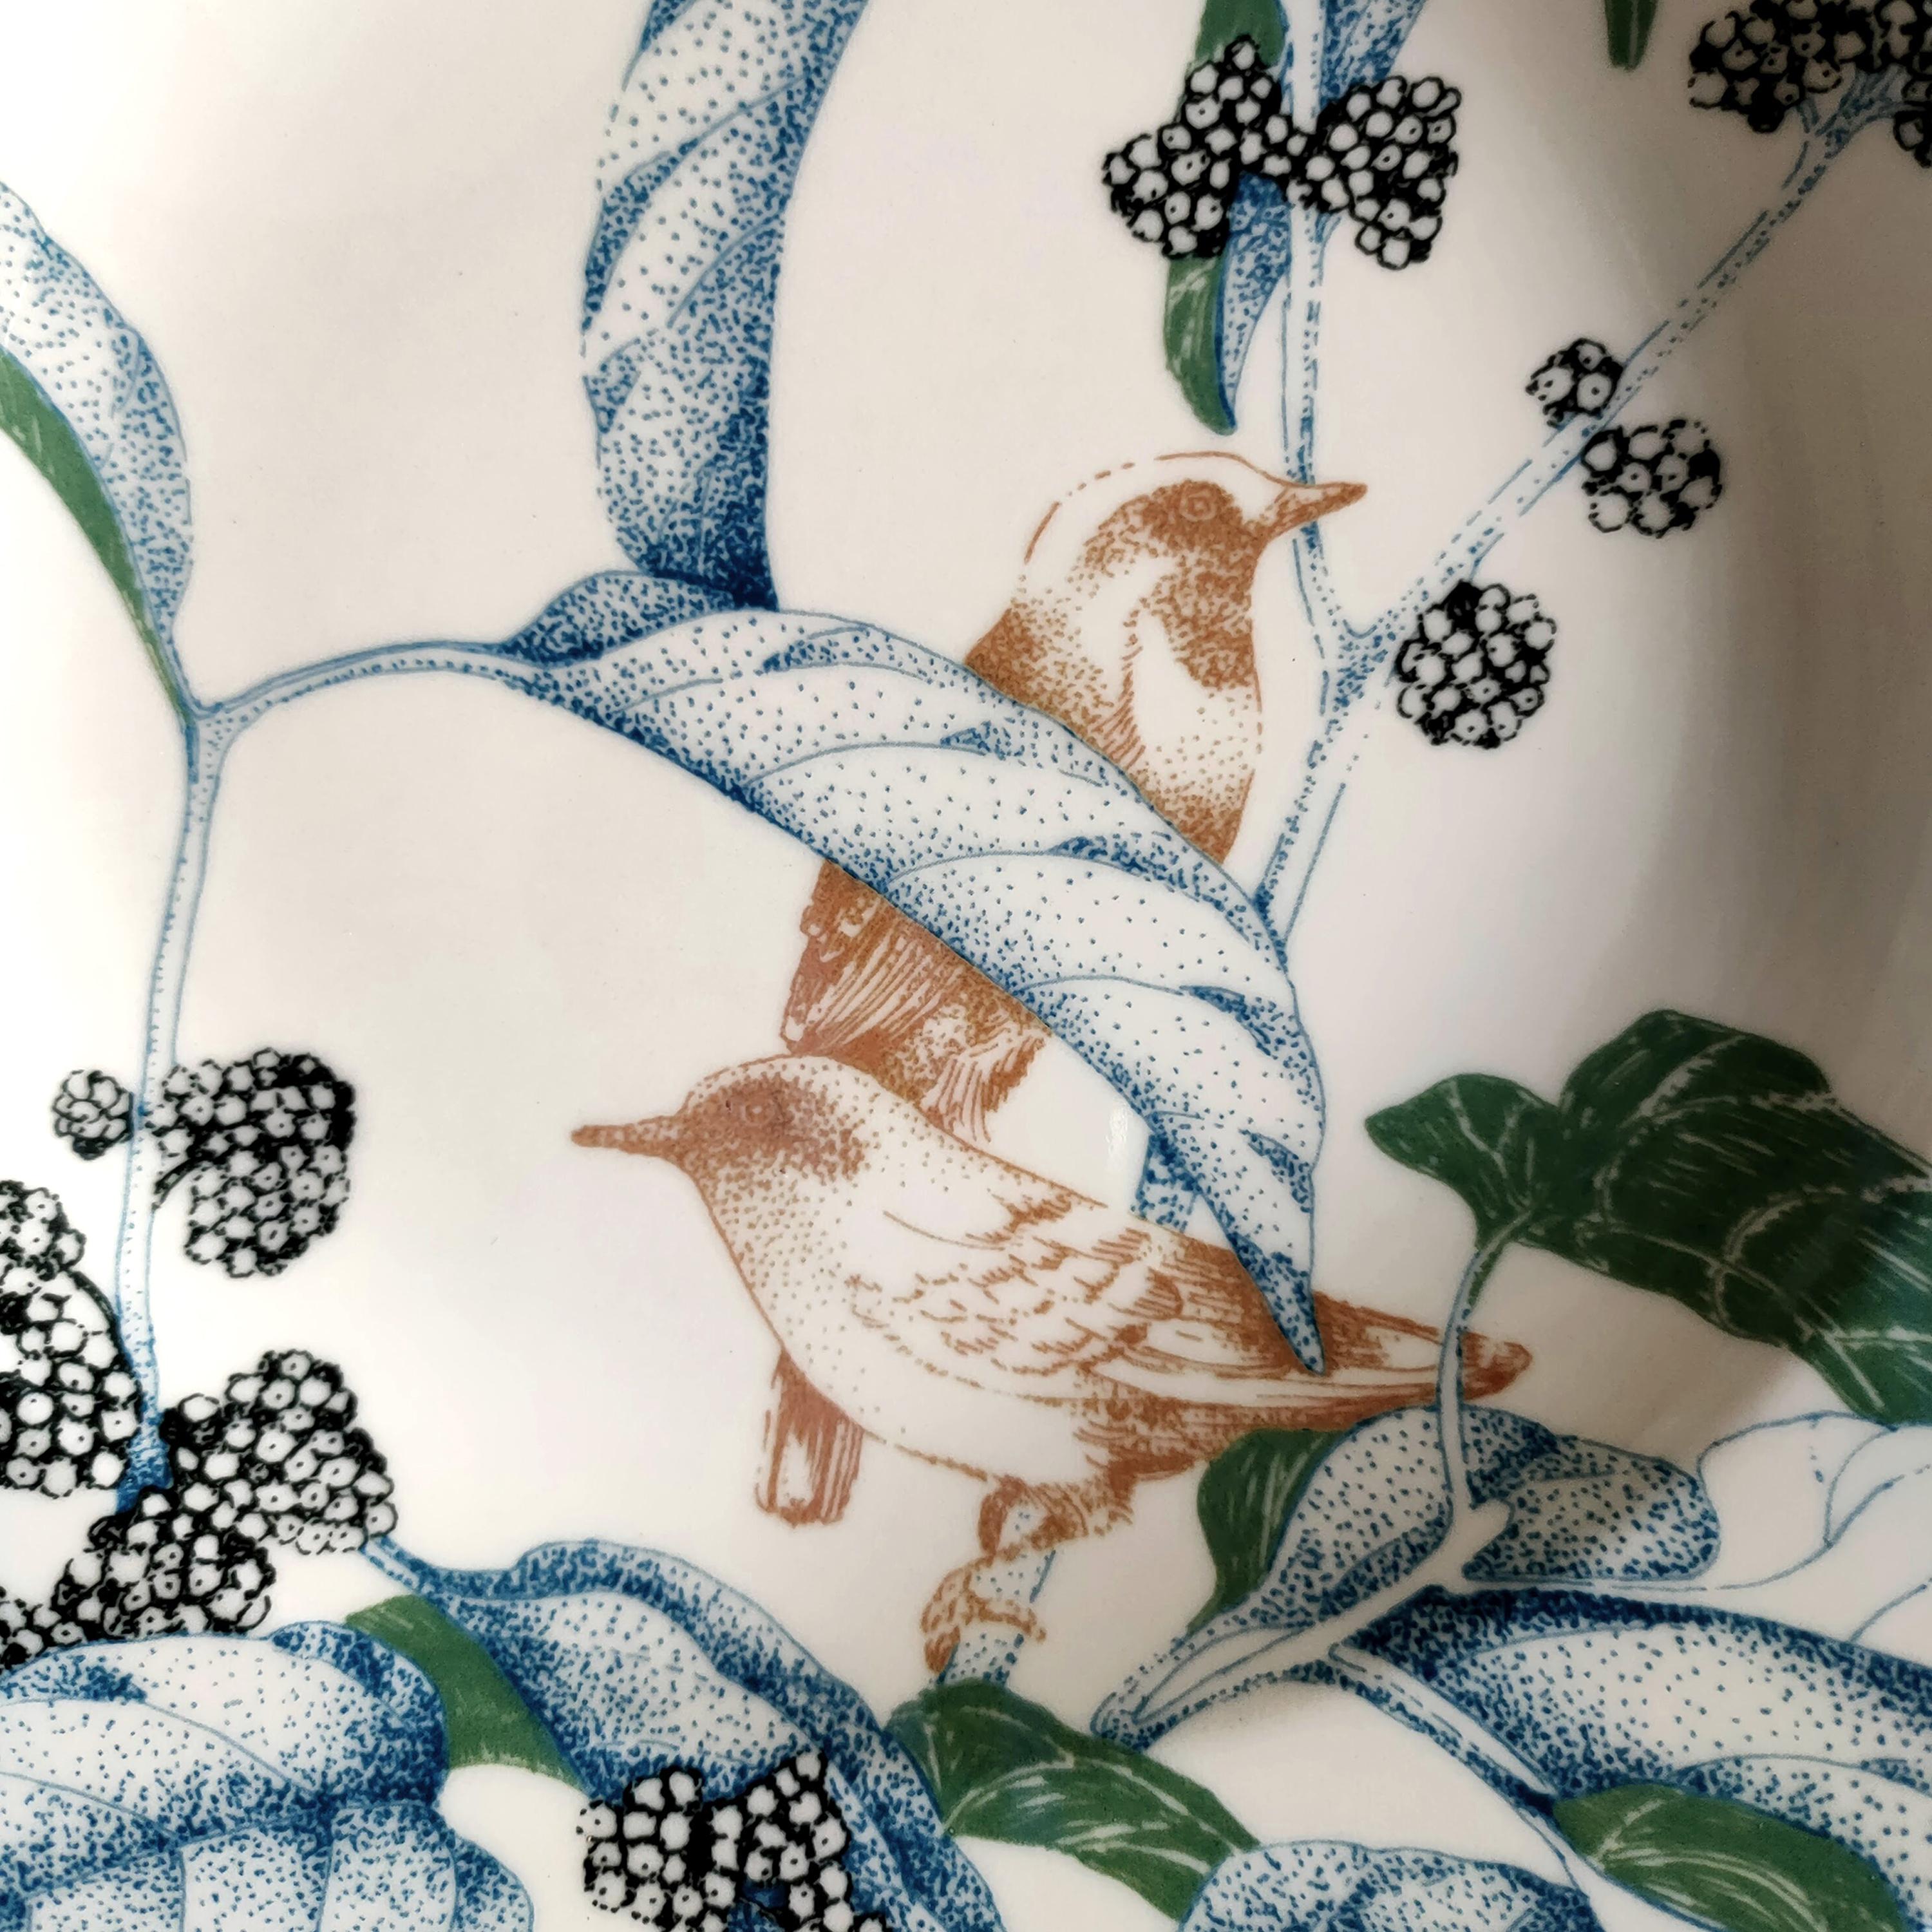 The Bird Song collection, features a design of wild birds hiding among delicate and intricate foliage in soft shades of blue, terracotta and dusty green. Originally created using the 'pointillism' technique, each scene, illustrated in detail,